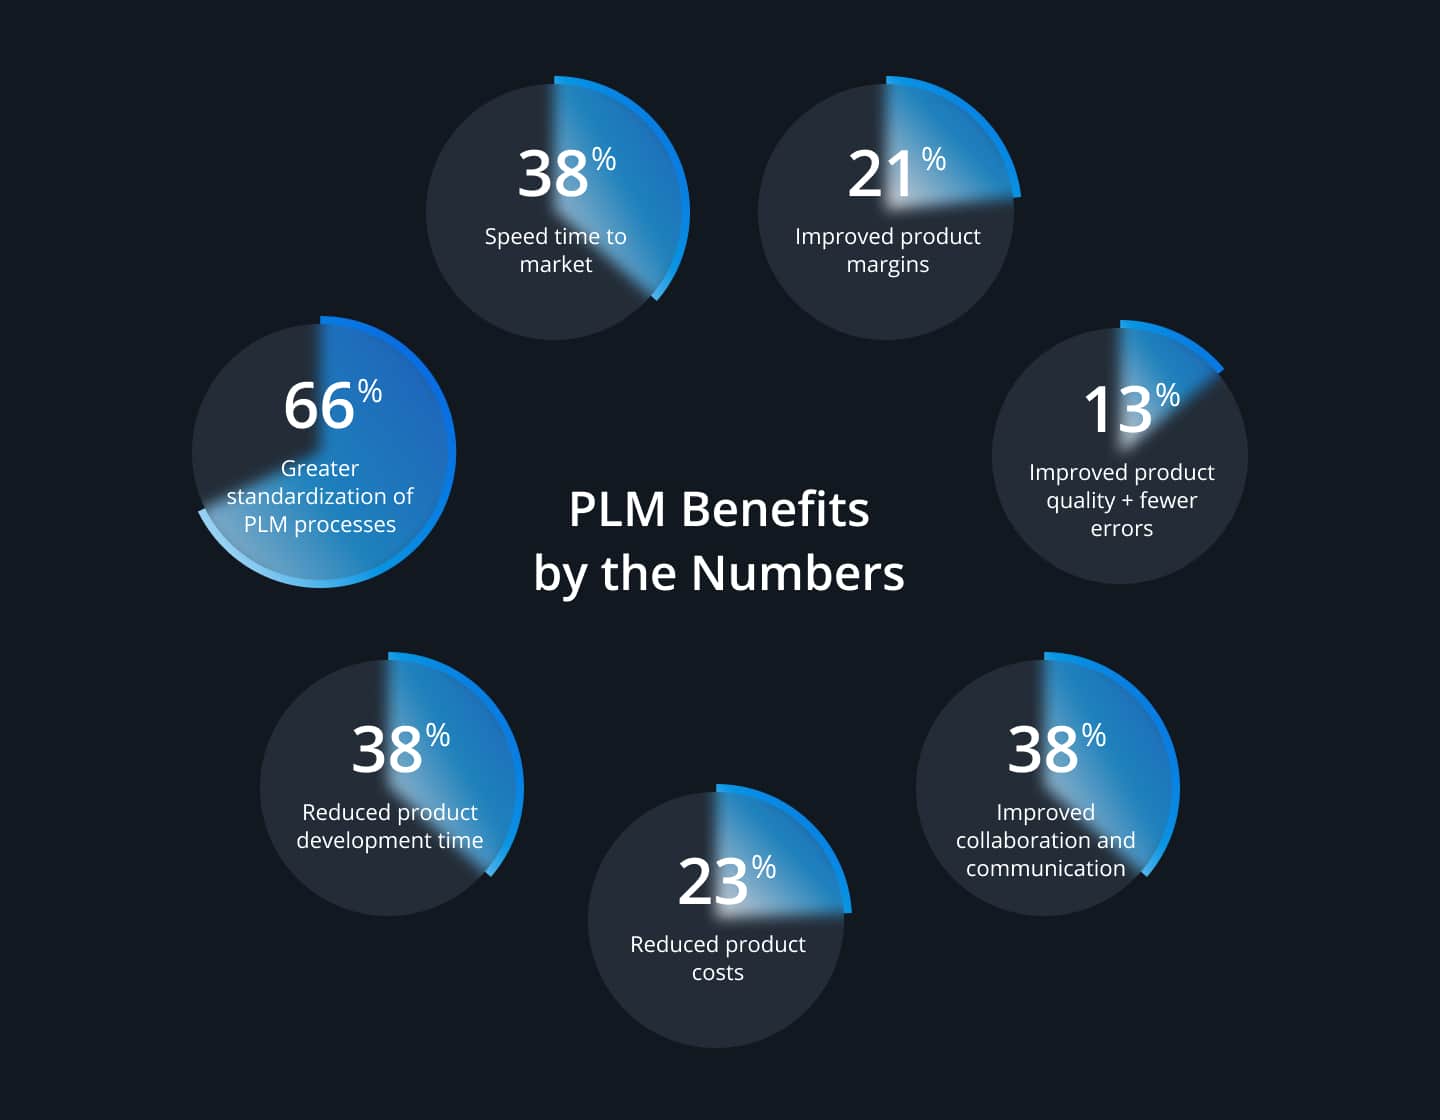 The benefits of Product Lifecycle Management by numbers